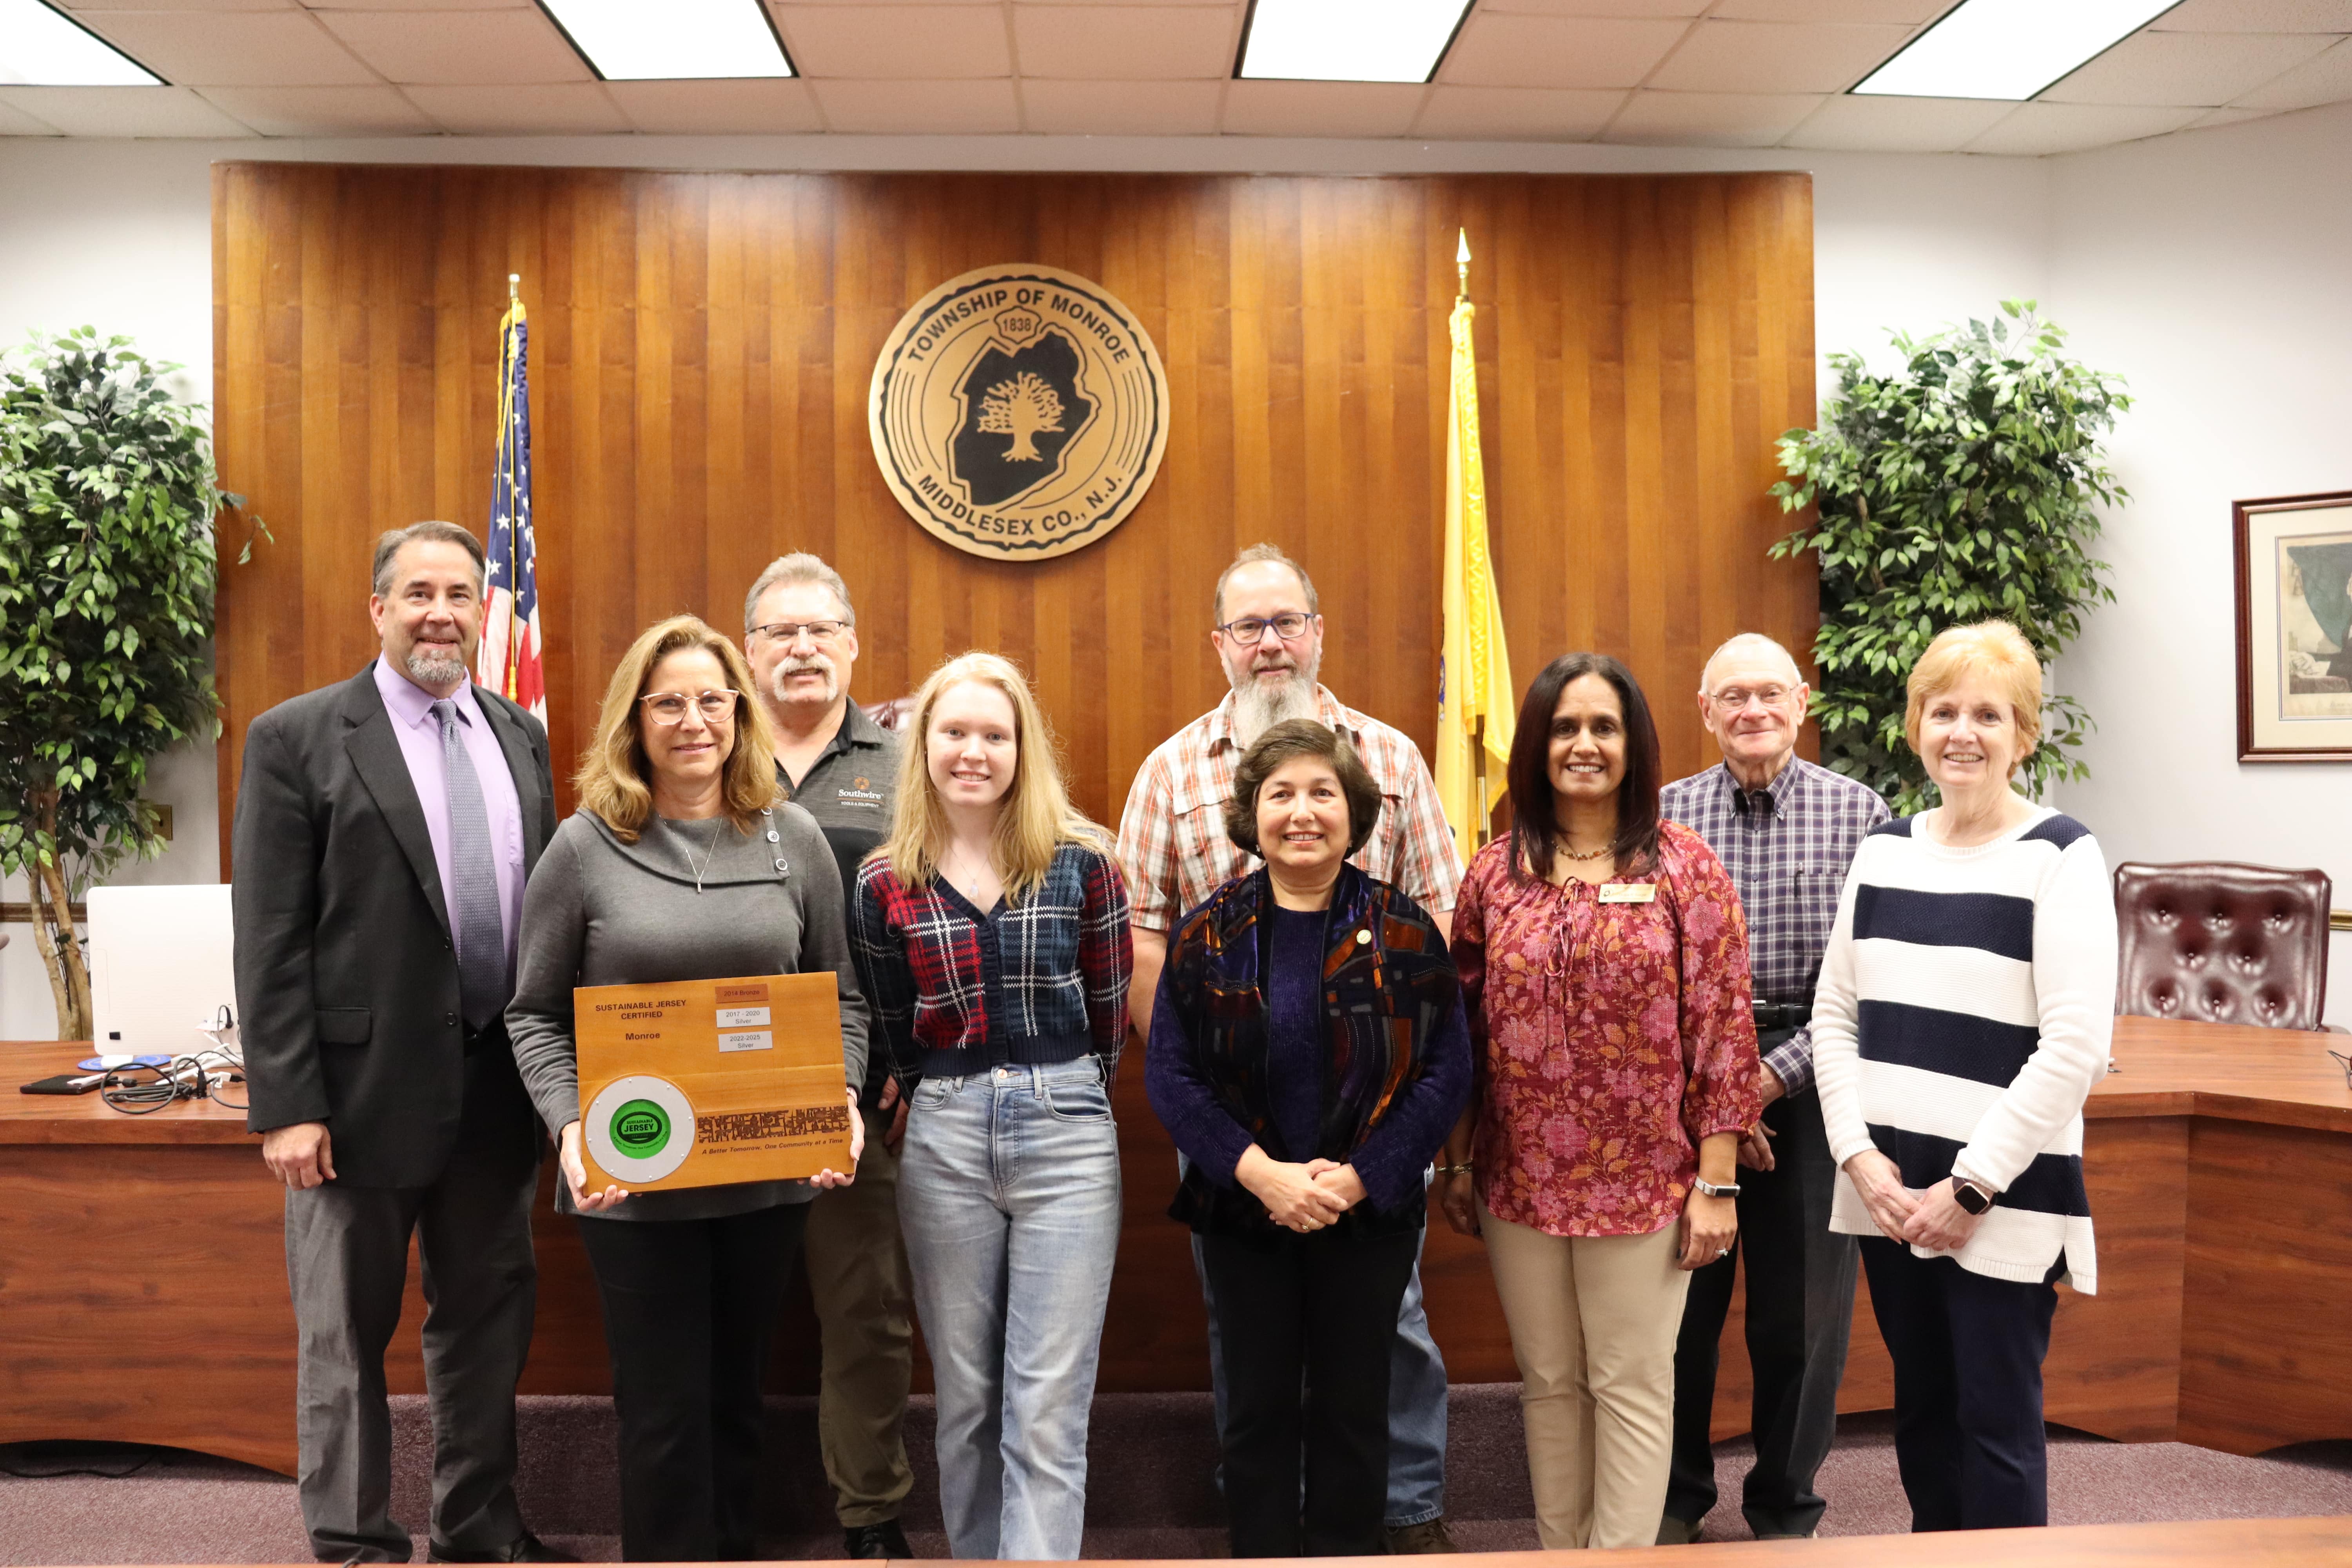 East Windsor achieves silver level Sustainable Jersey